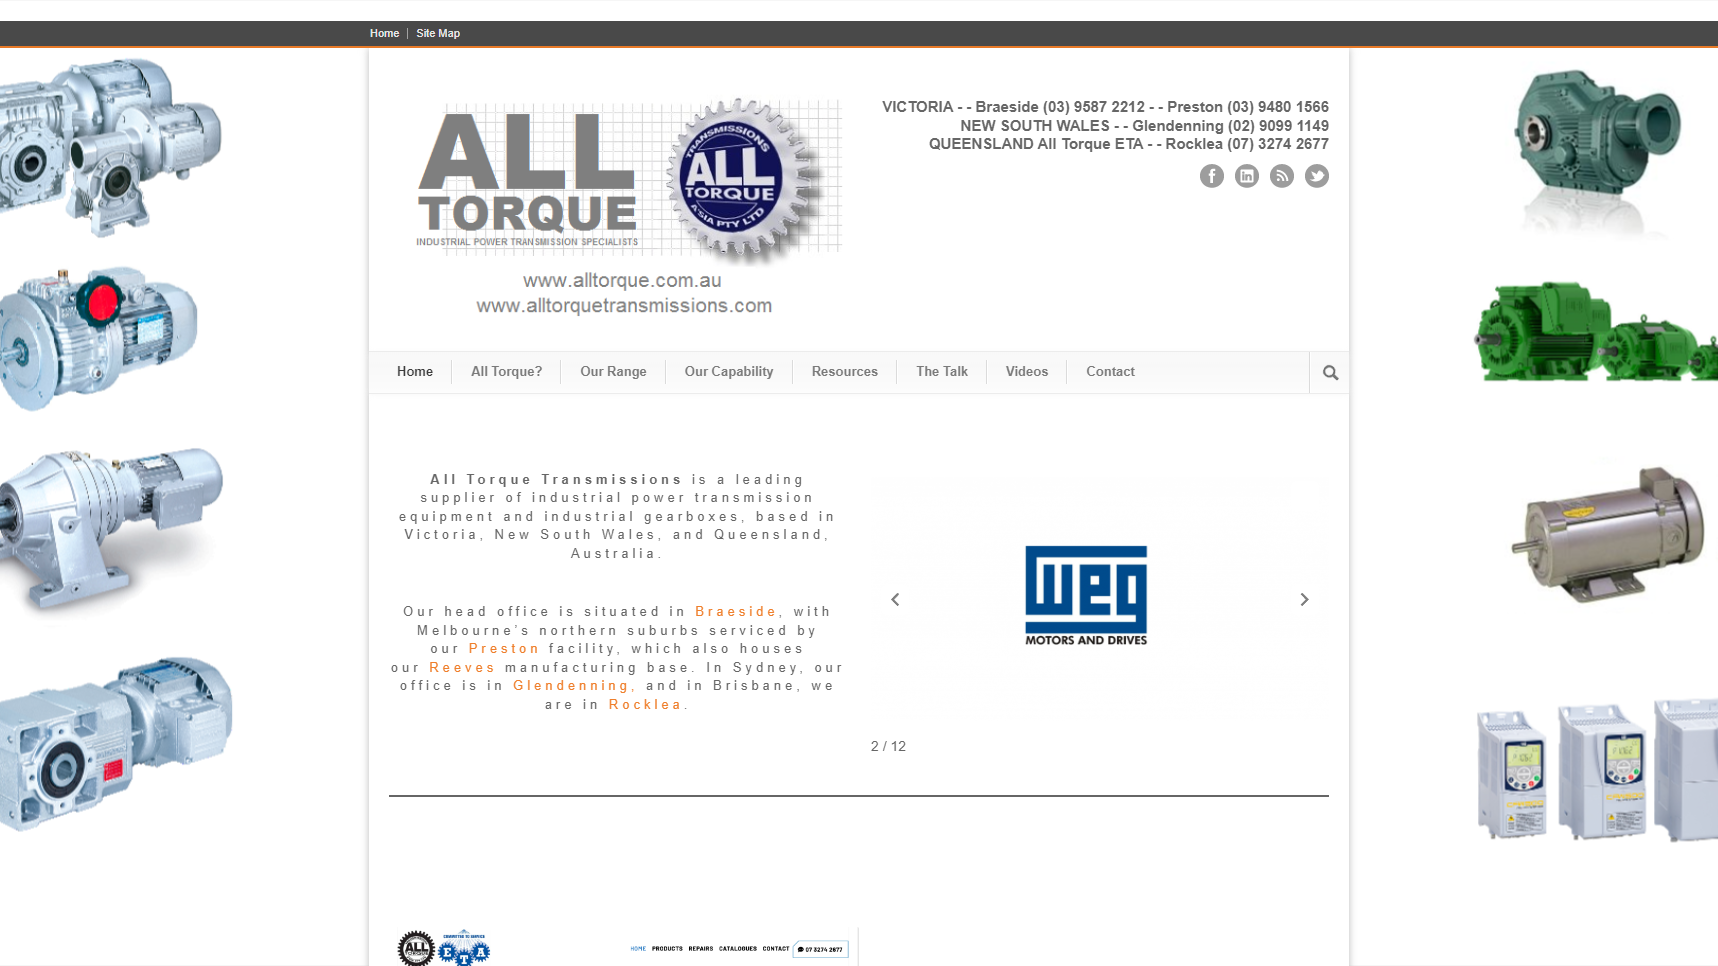 All Torque Transmissions - Gearbox Manufacturer